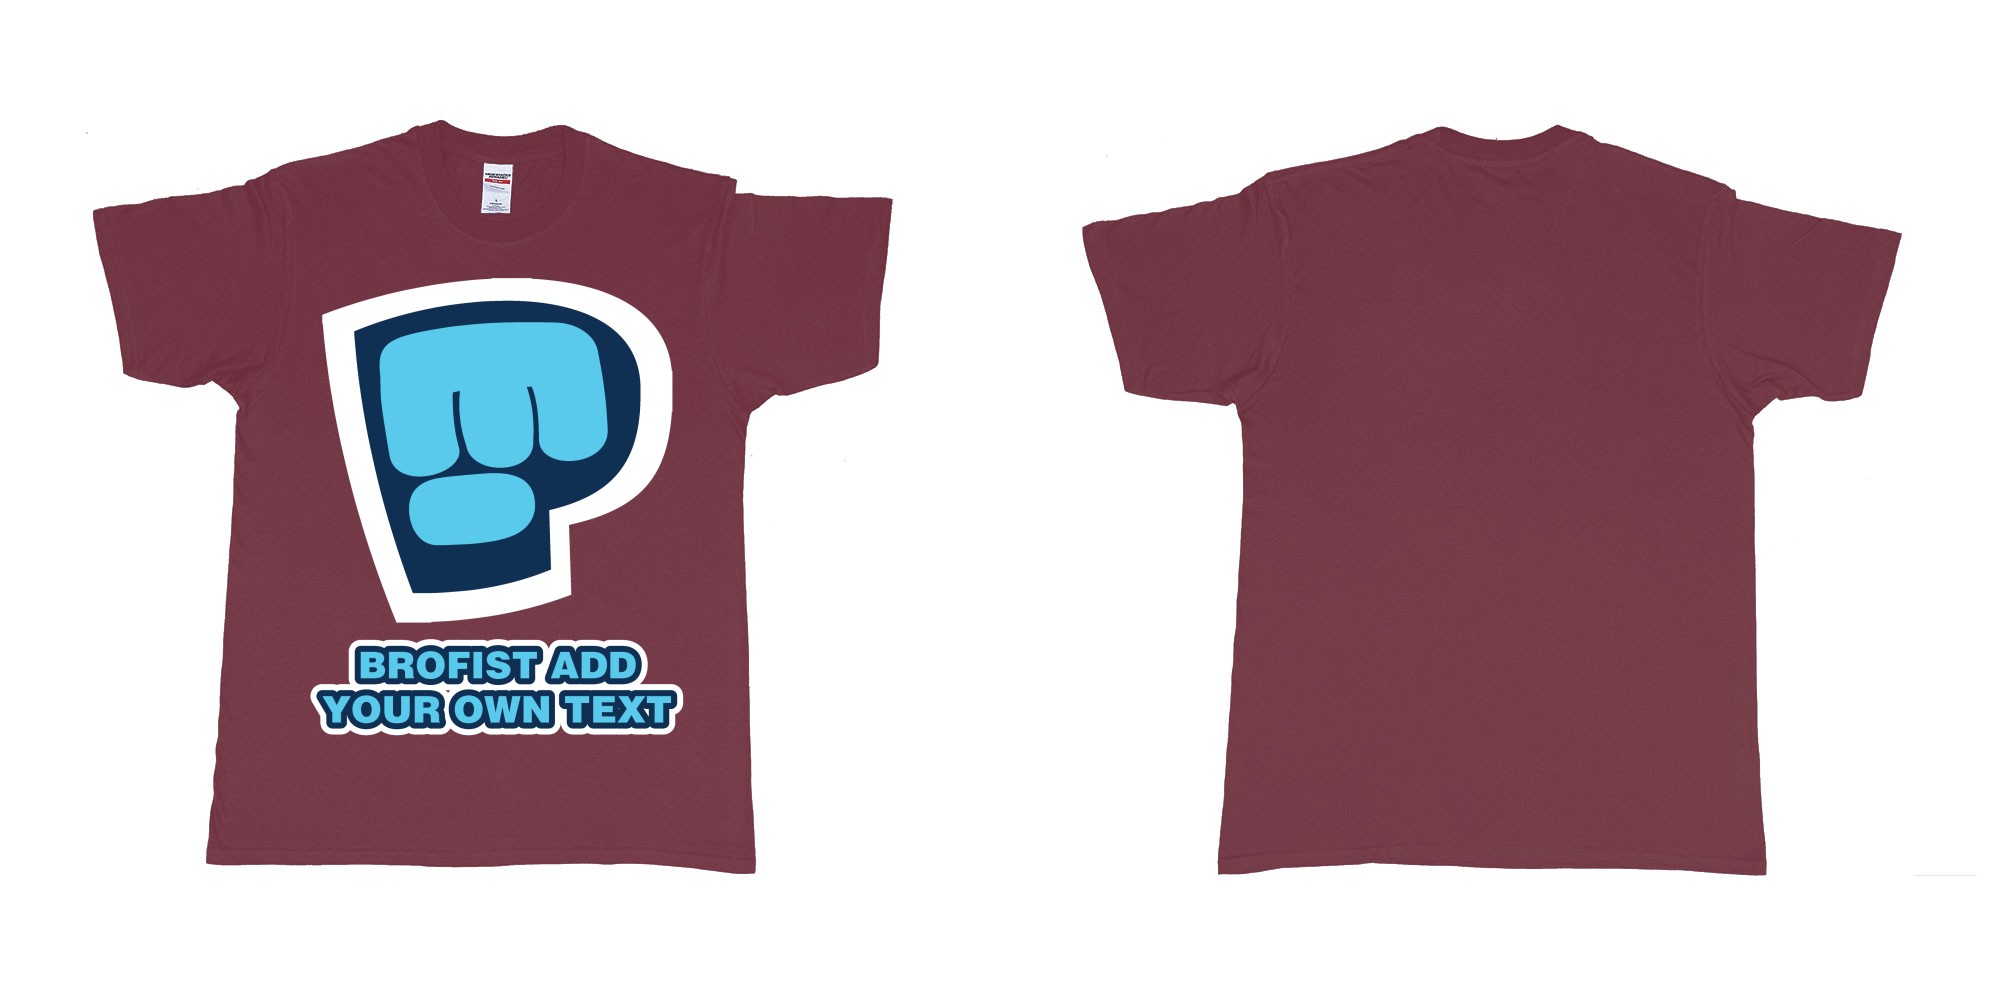 Custom tshirt design pewdiepie brofist in fabric color marron choice your own text made in Bali by The Pirate Way